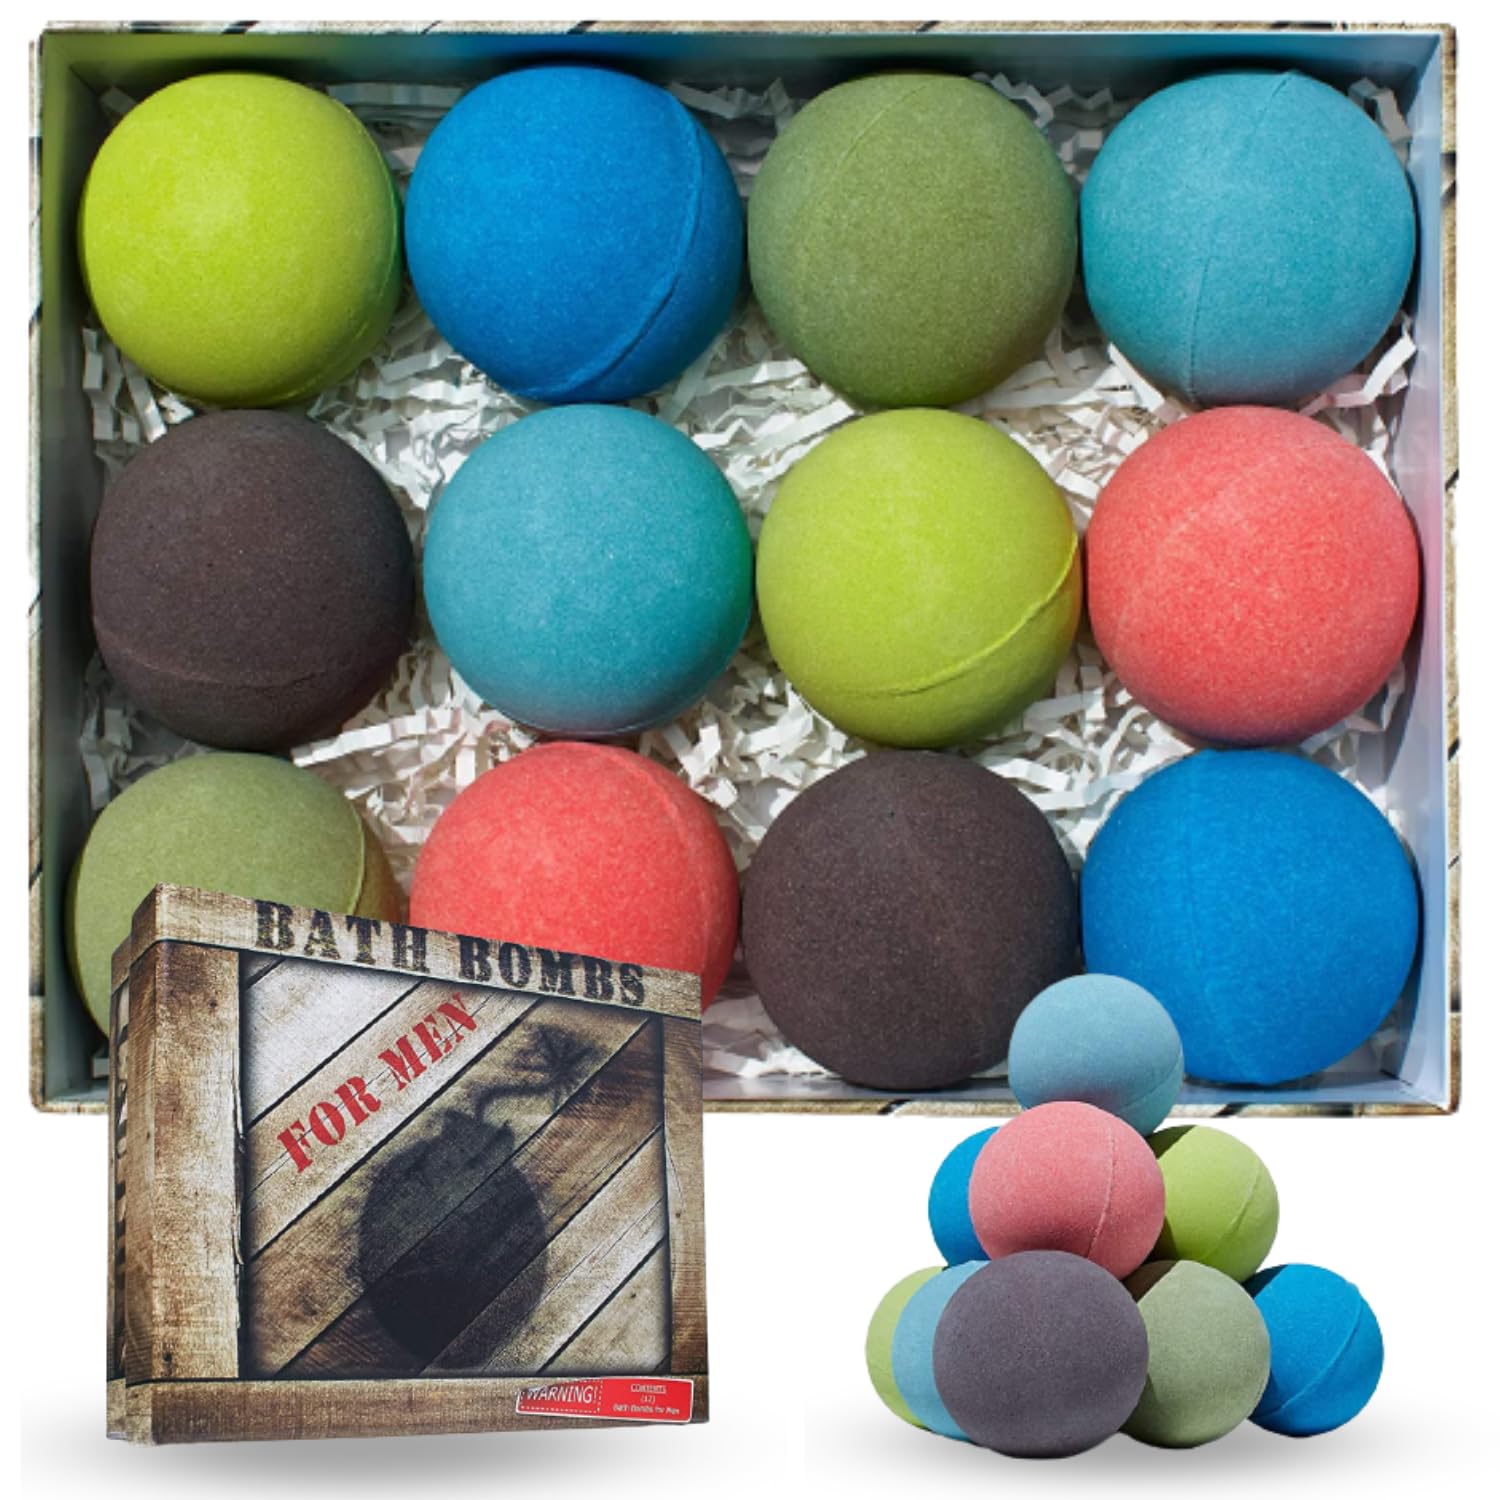 Crate Bath Bombs for Men Set of 12, Relaxing Bubble Bath Bombs, Spa Gift for Men with Epsom Salt & Shea Butter. Perfect for Gift Idea for Birthdays, Husband, Father & Friend by Trade Sailor